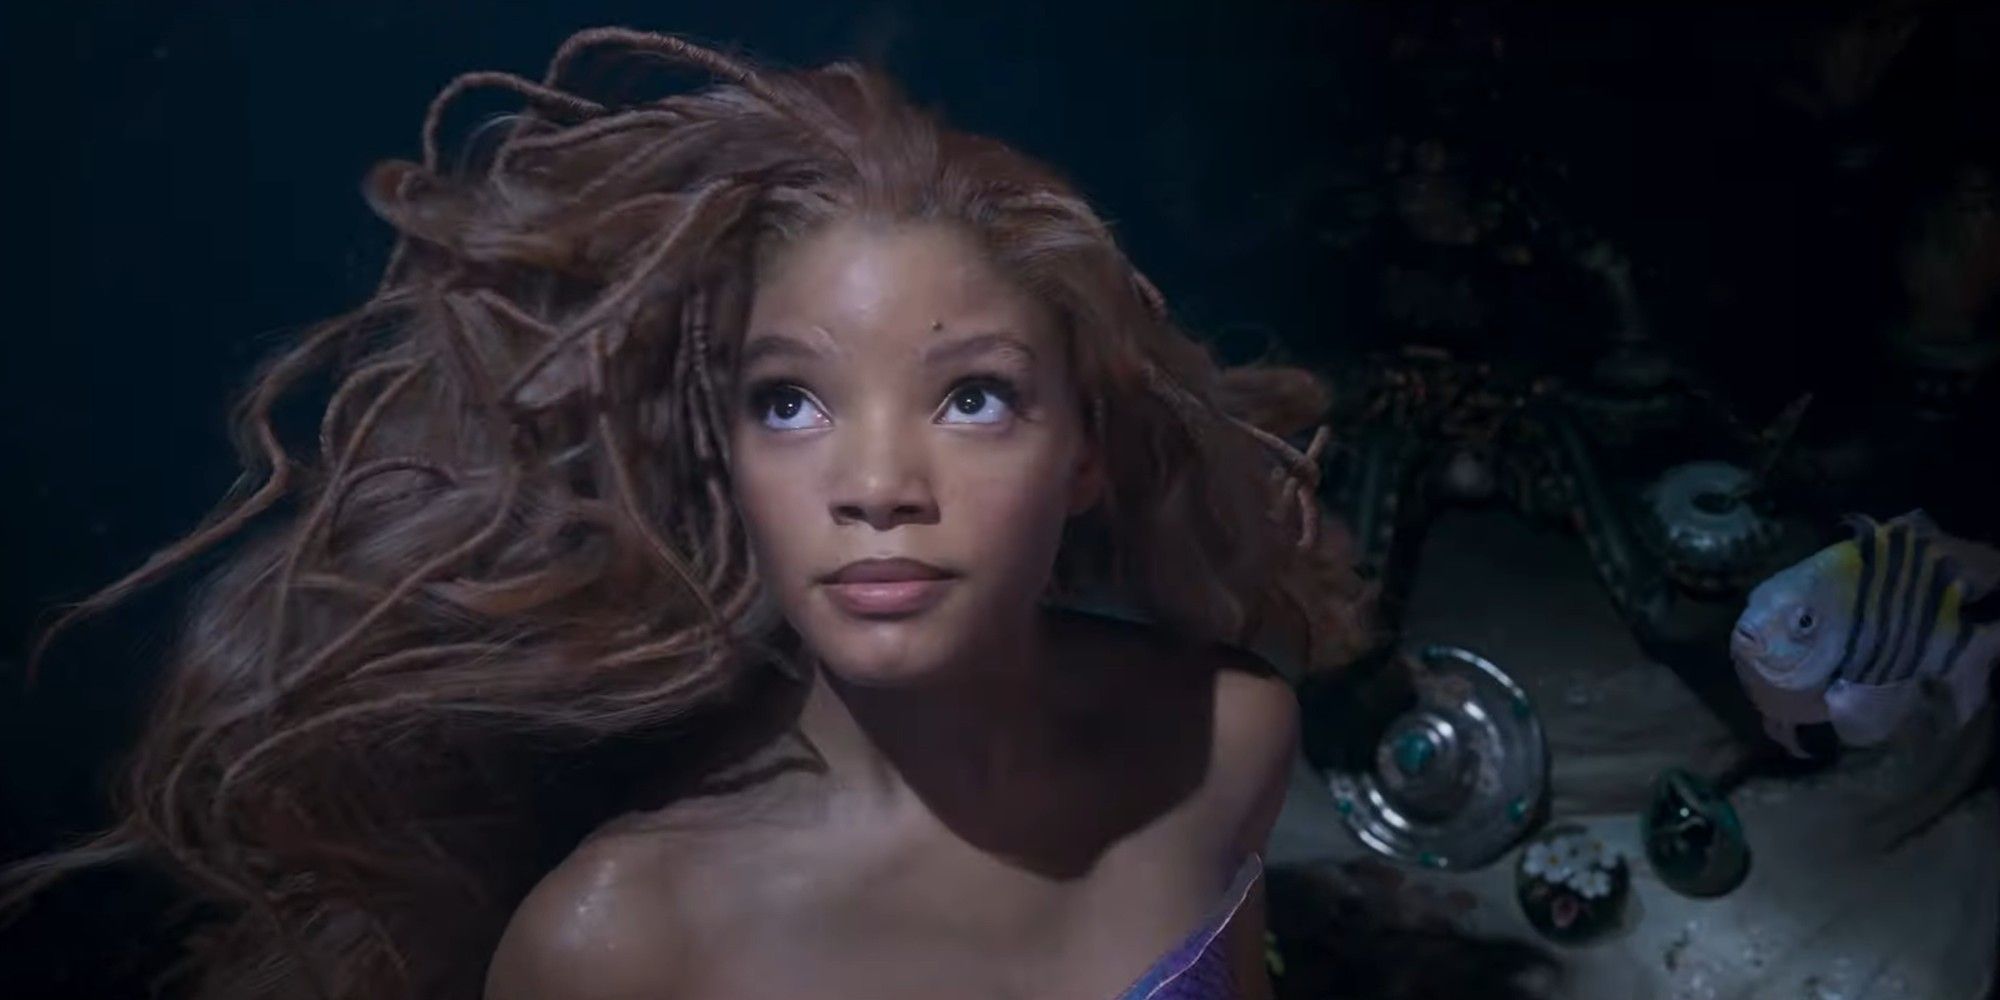 Halle Bailey as Ariel in the trailer for The Little Mermaid that debuted at the 2023 Oscars